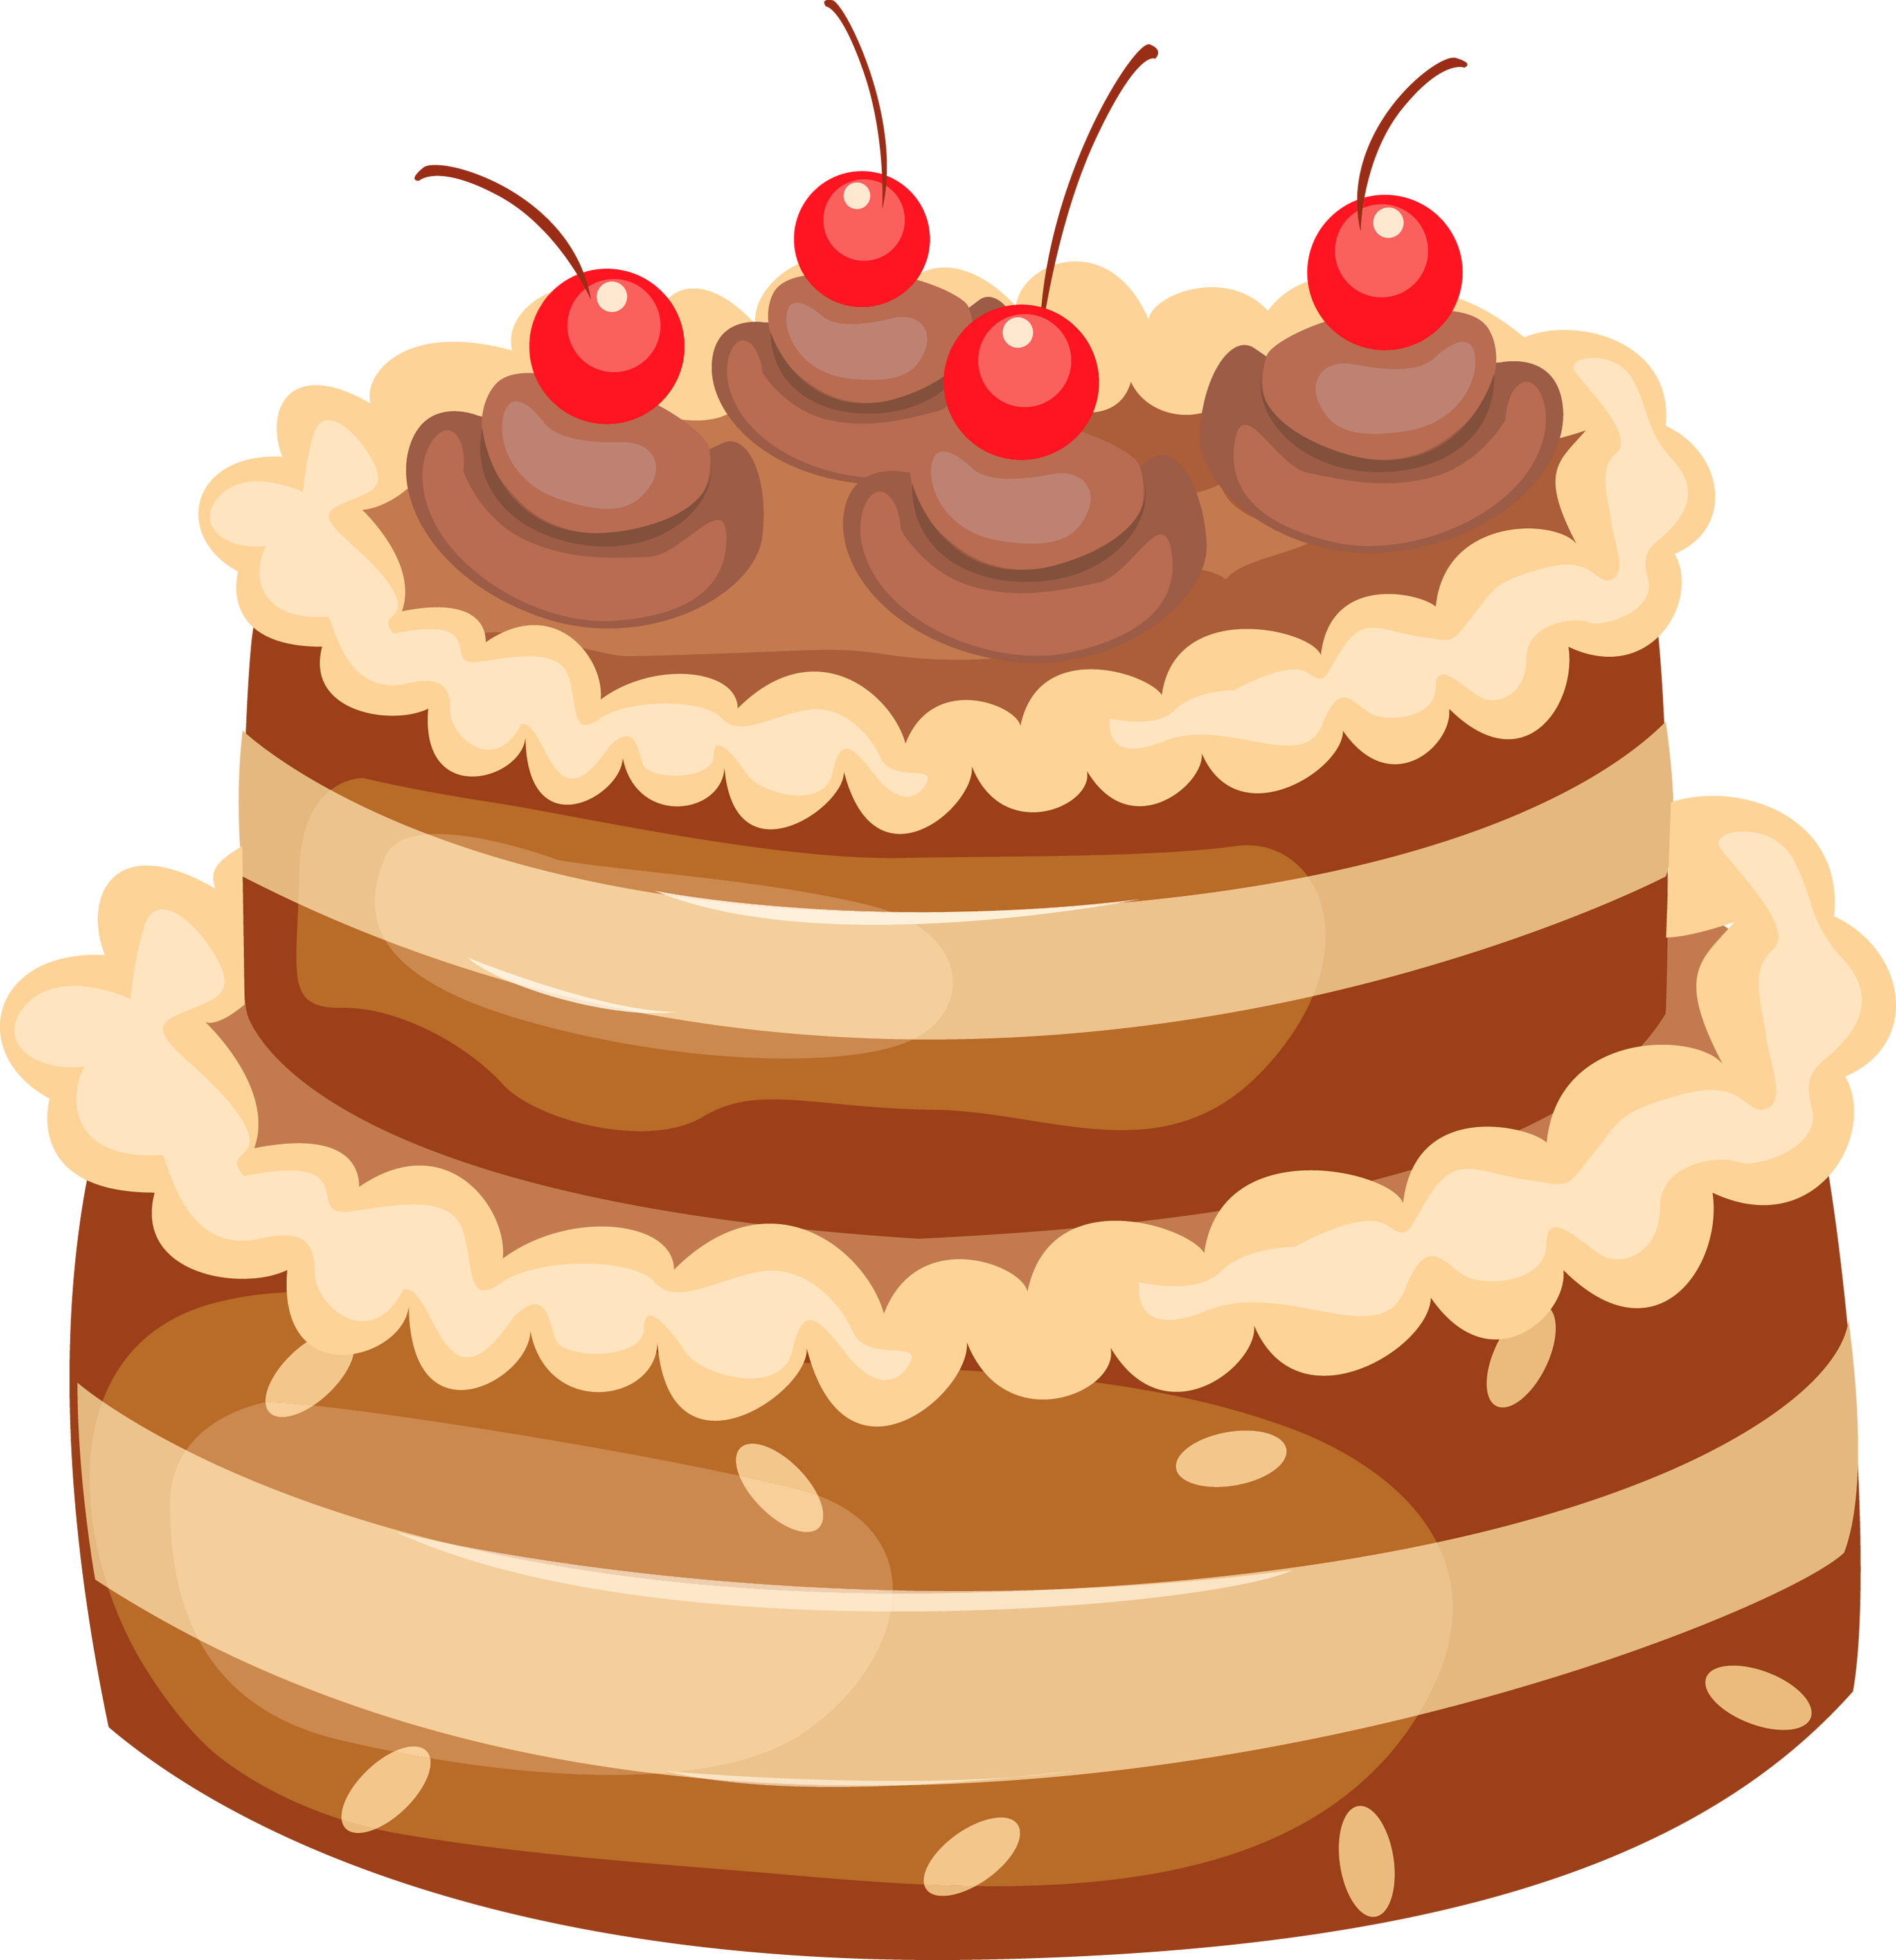 Colorful birthday cake on transparent background PNG - Similar PNG